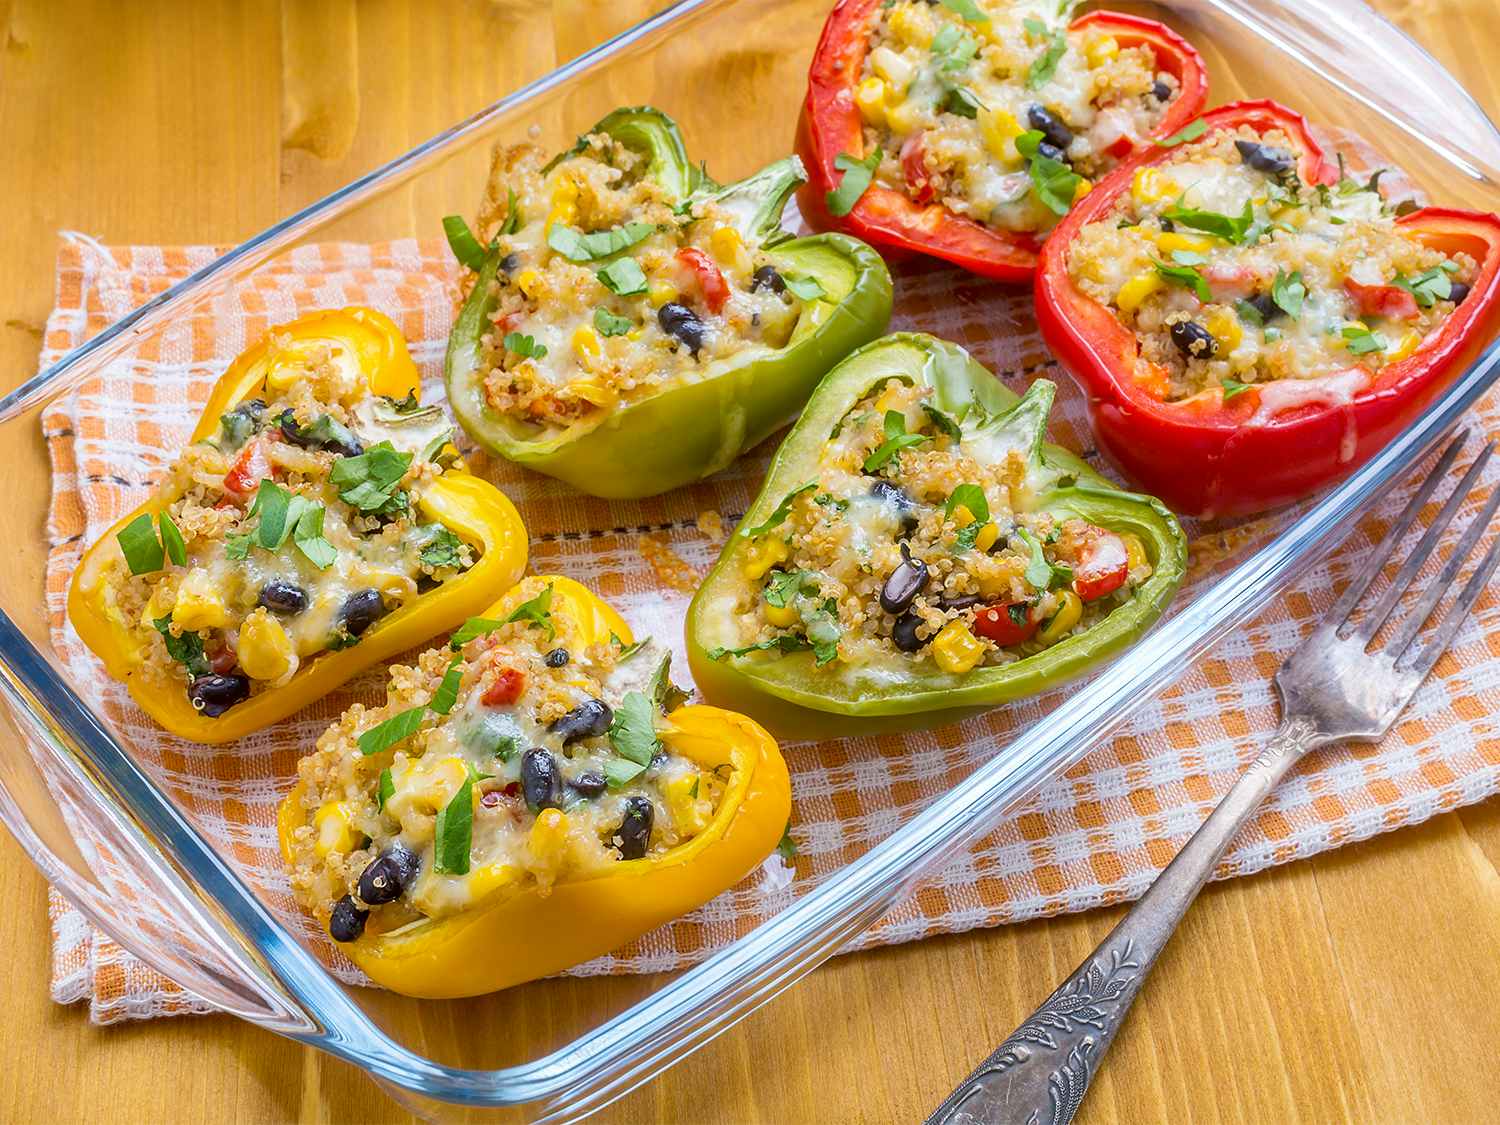 https://prod-cdn-thekrazycouponlady.imgix.net/wp-content/uploads/2016/01/meals-under-500-calories-baked-mexican-quinoa-stuffed-peppers-141069079-1667276571-1667276571.jpg?auto=format&fit=fill&q=25